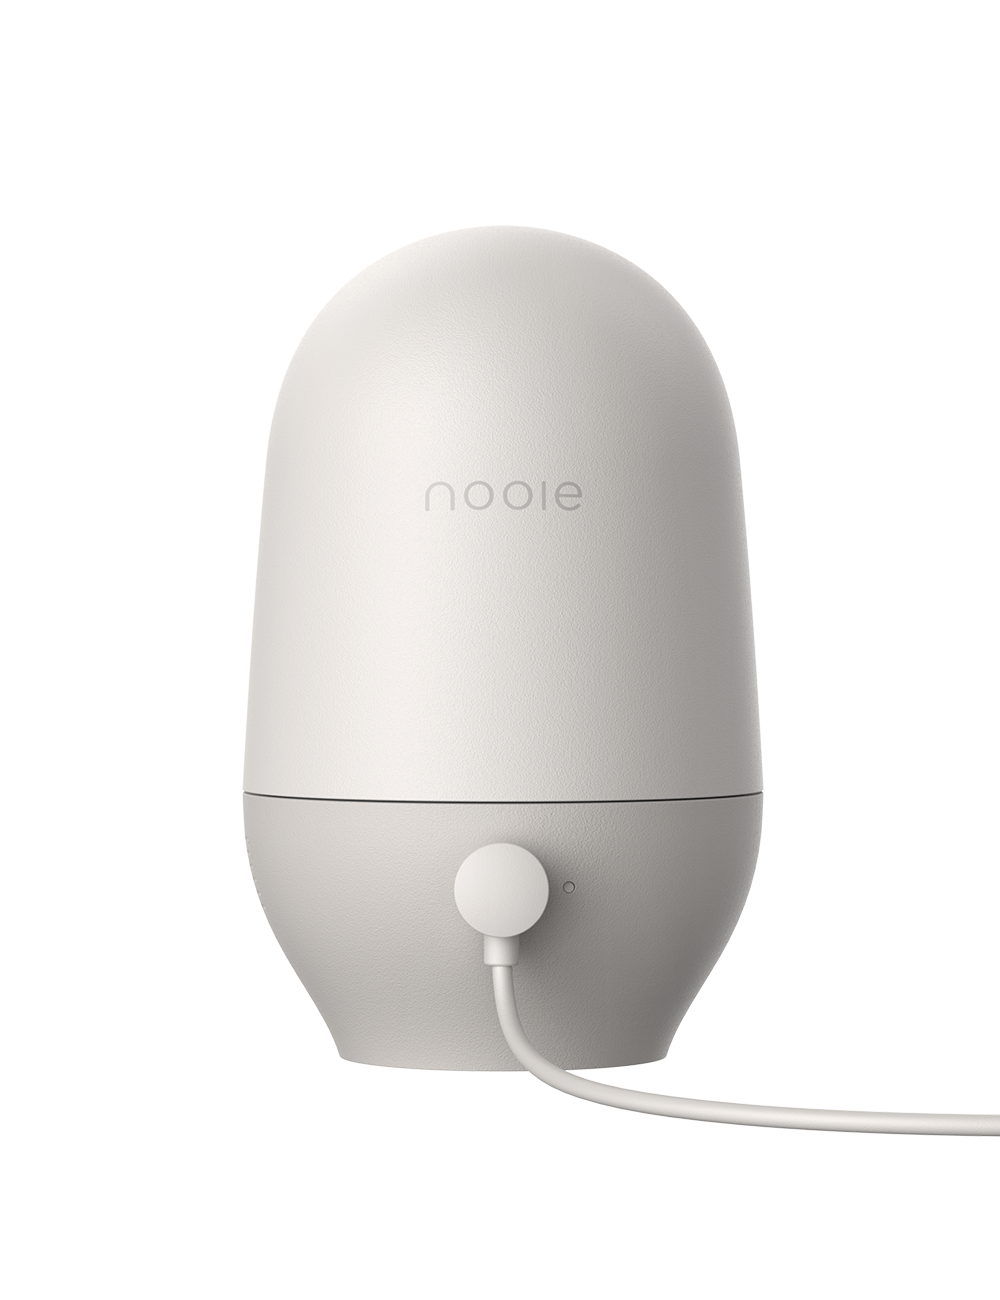 Nooie® Smart WiFi Bulbs, Personalized Your Own Light